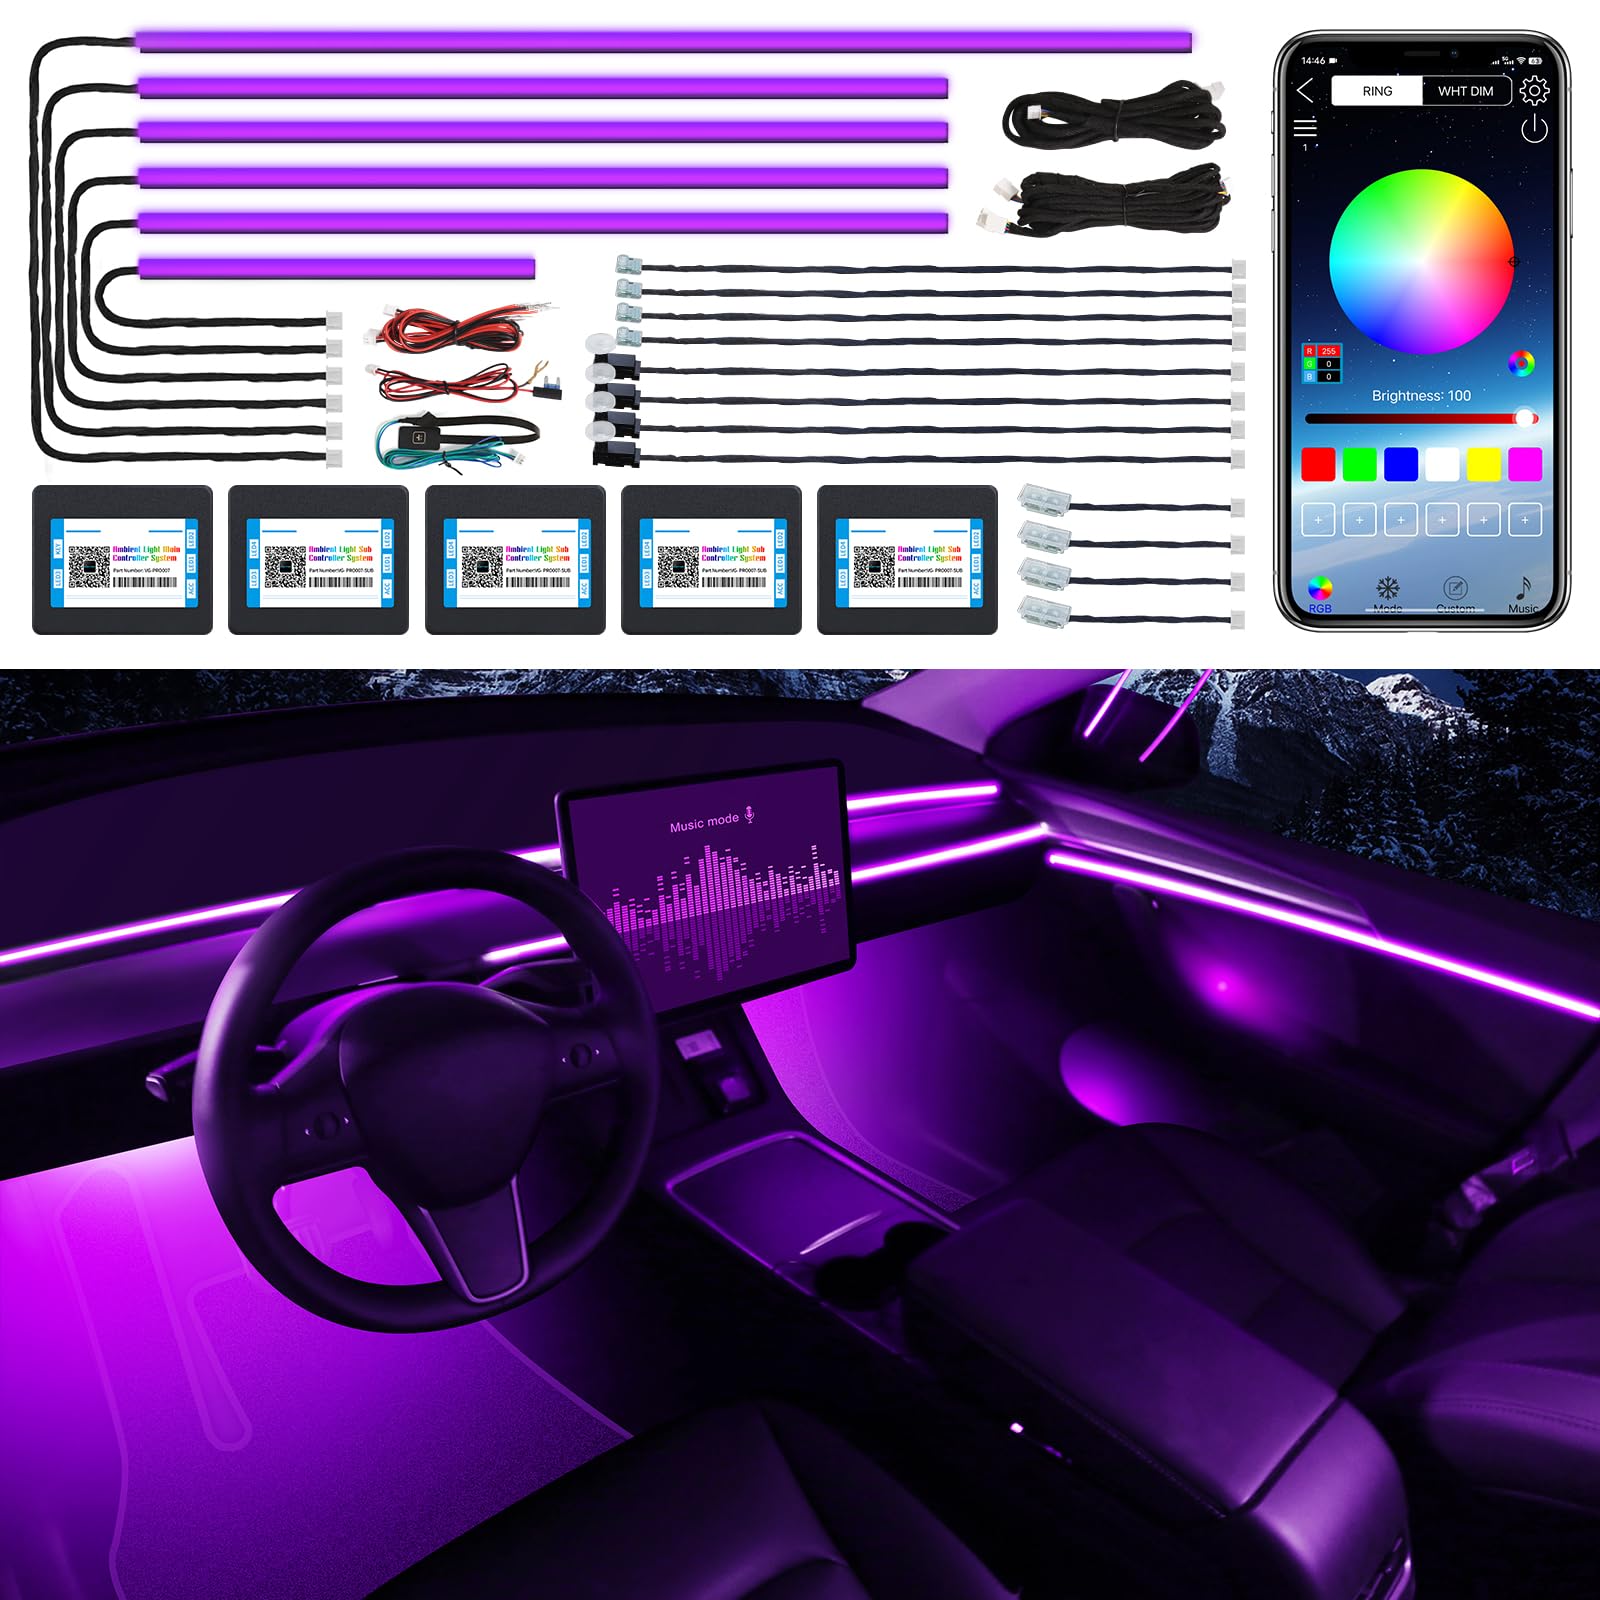 TWETIZ Acrylic Interior Car LED Strip Light with APP, RGB 18 in 1 with 175 inches 600 LEDs Car Ambient Lighting Kits, Sound Active Function LED Strip for Car von TWETIZ